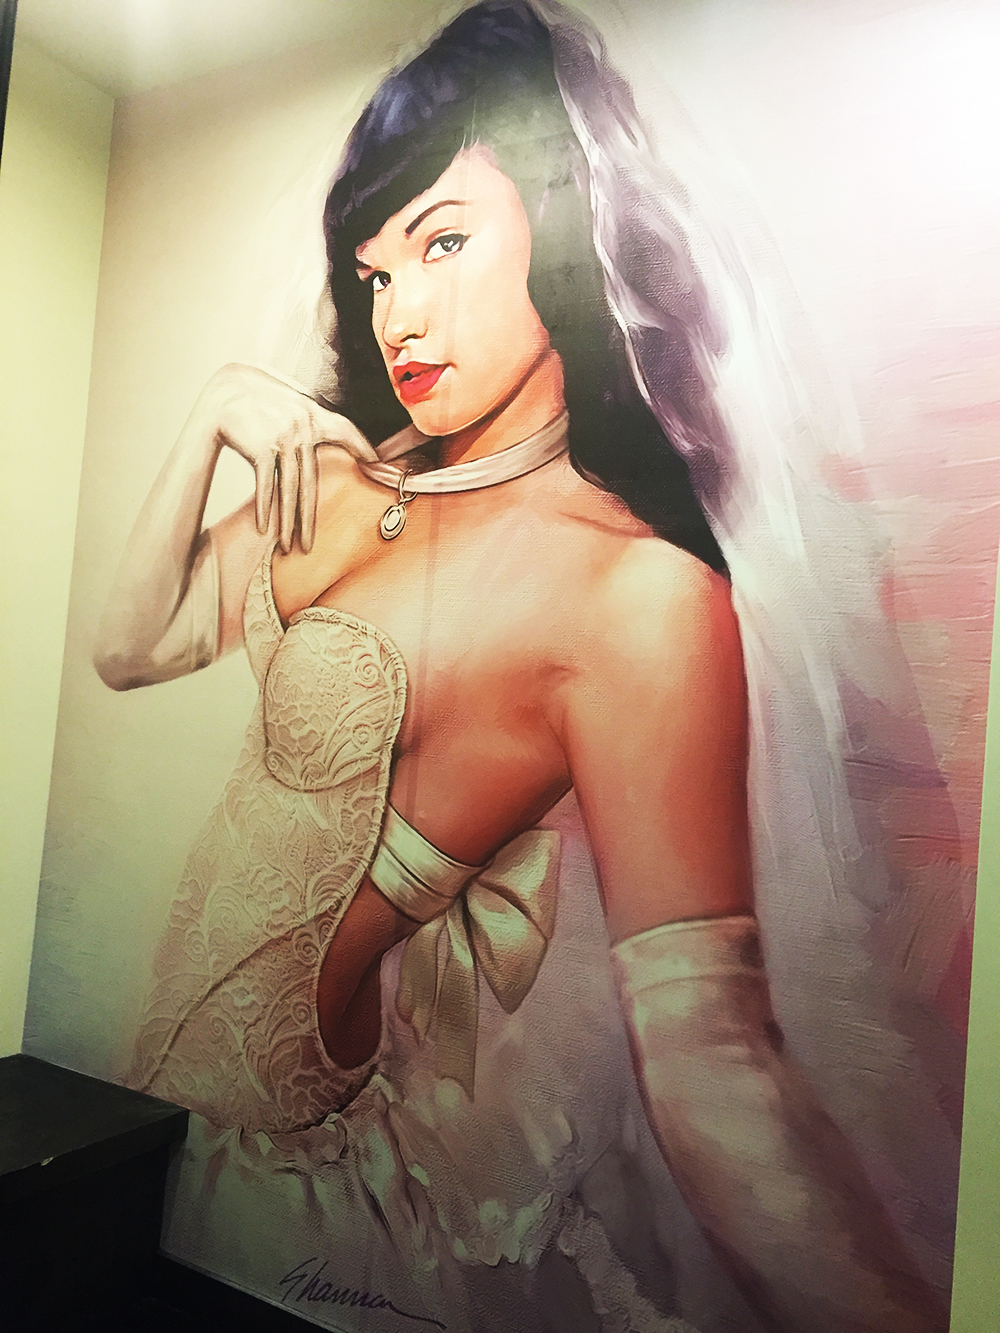 Walls360 Custom Wall-to-Wall Graphics for the New Bettie Page Store in Santa Monica